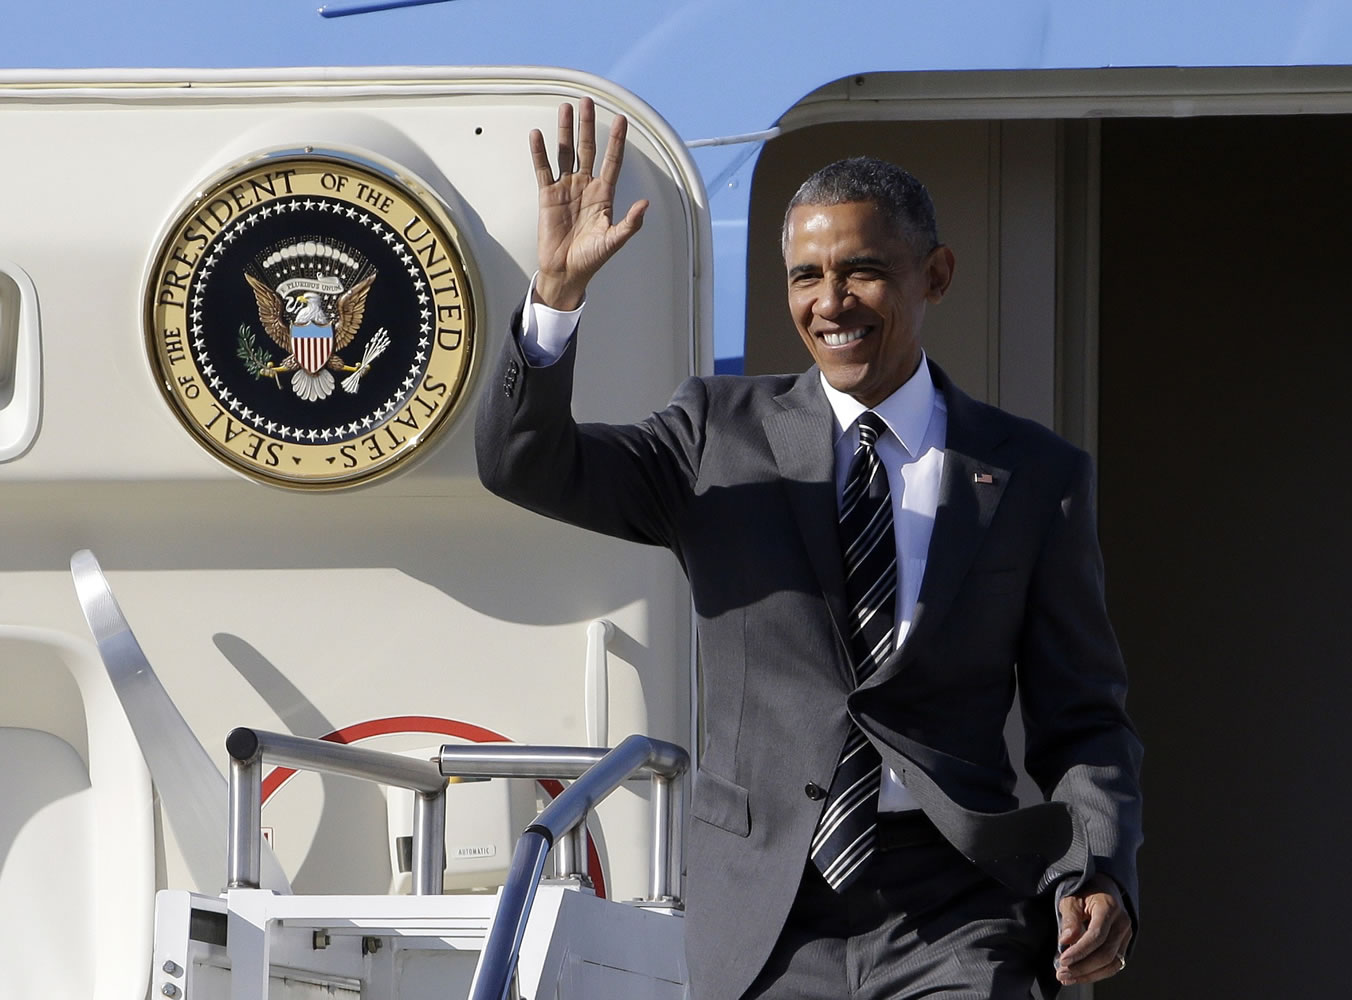 President Barack Obama waves as he arrives in Portland on Thursday. On Friday, the president will visit Nike headquarters in Beaverton, Ore., to make his trade policy pitch as he struggles to win over Democrats for what could be the last major legislative push of his presidency.